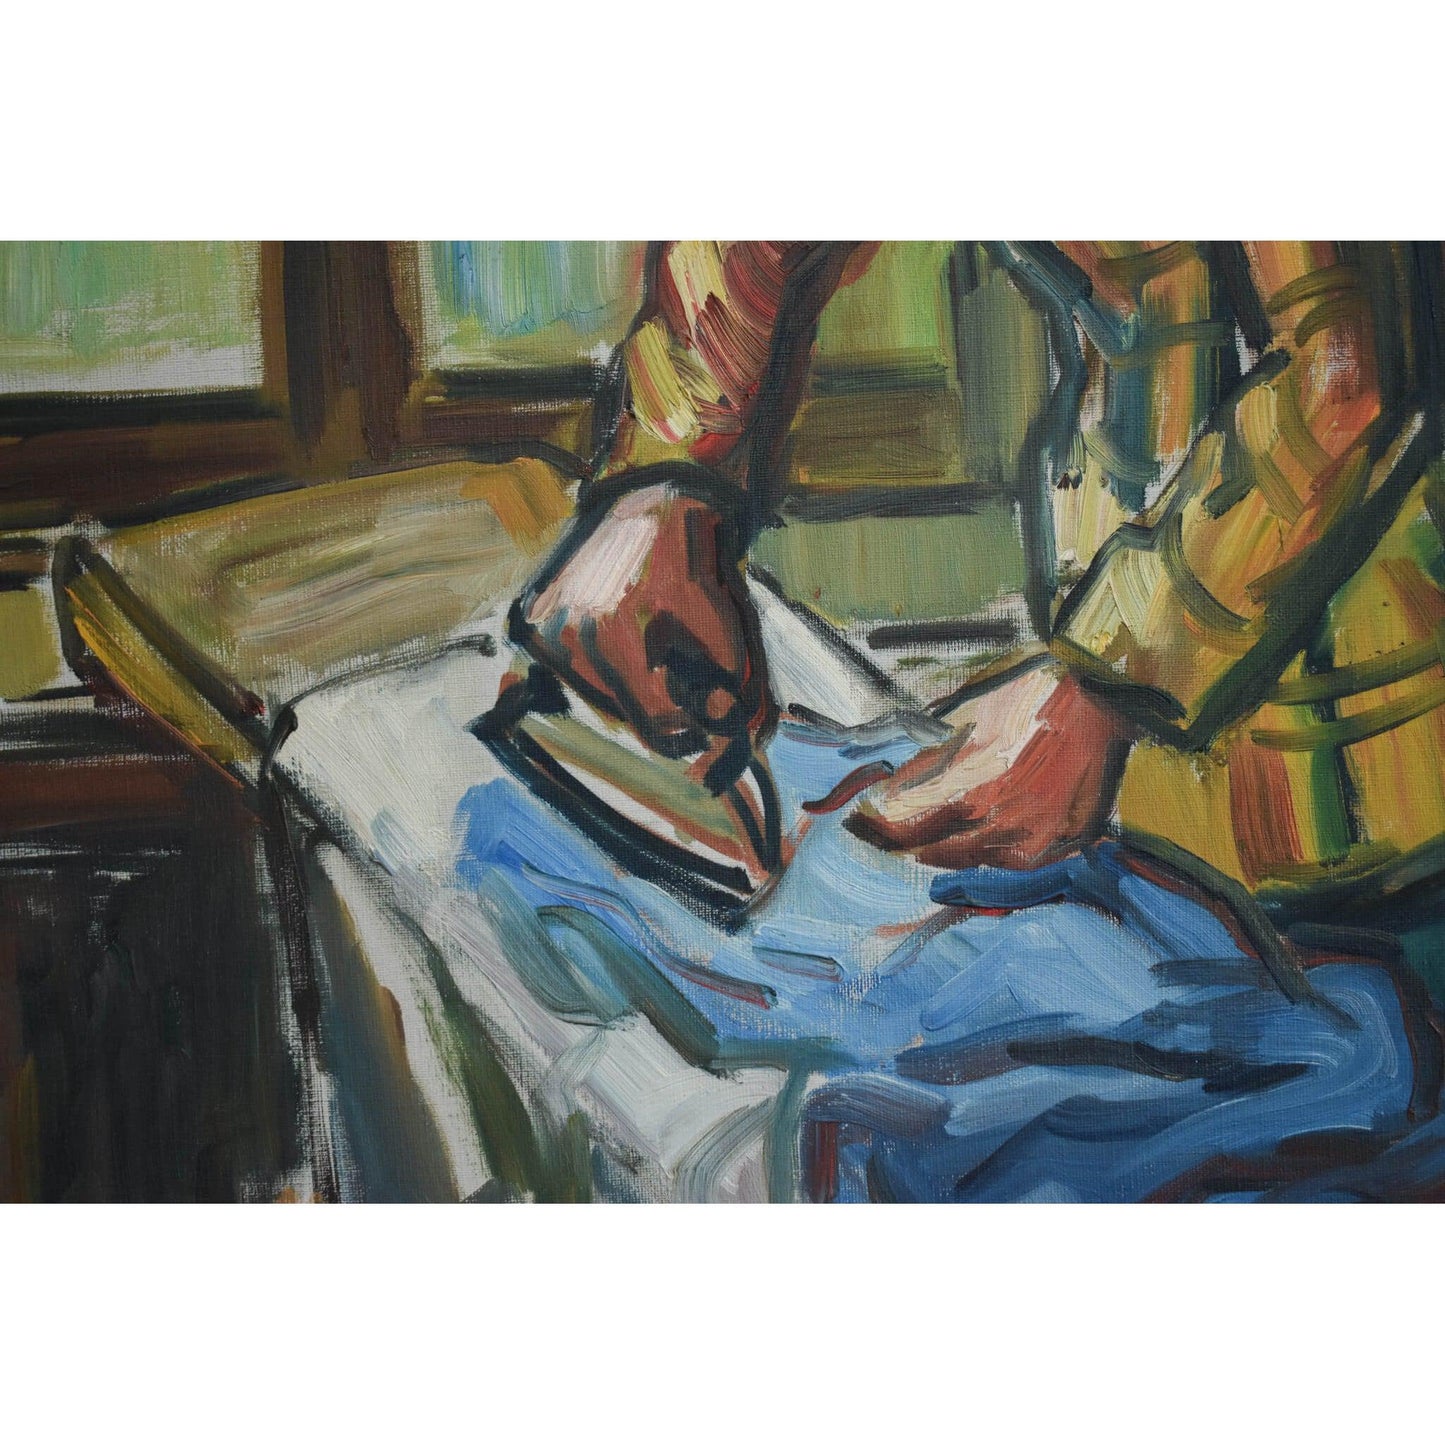 Vintage oil painting, interior scene with a woman ironing, French School circa 1940, for sale at Winckelmann Gallery